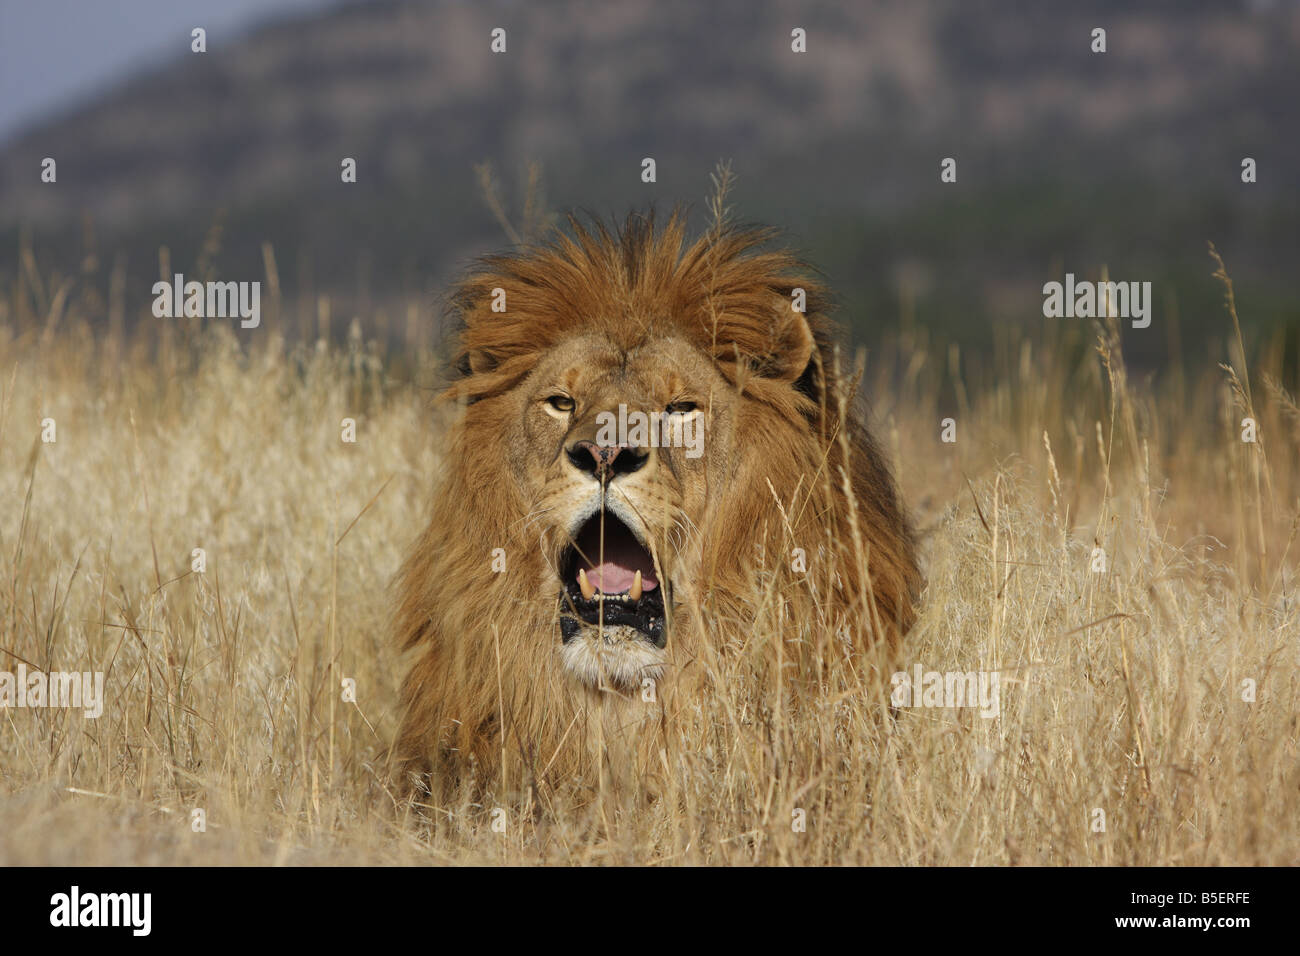 Lion in long grass Stock Photo